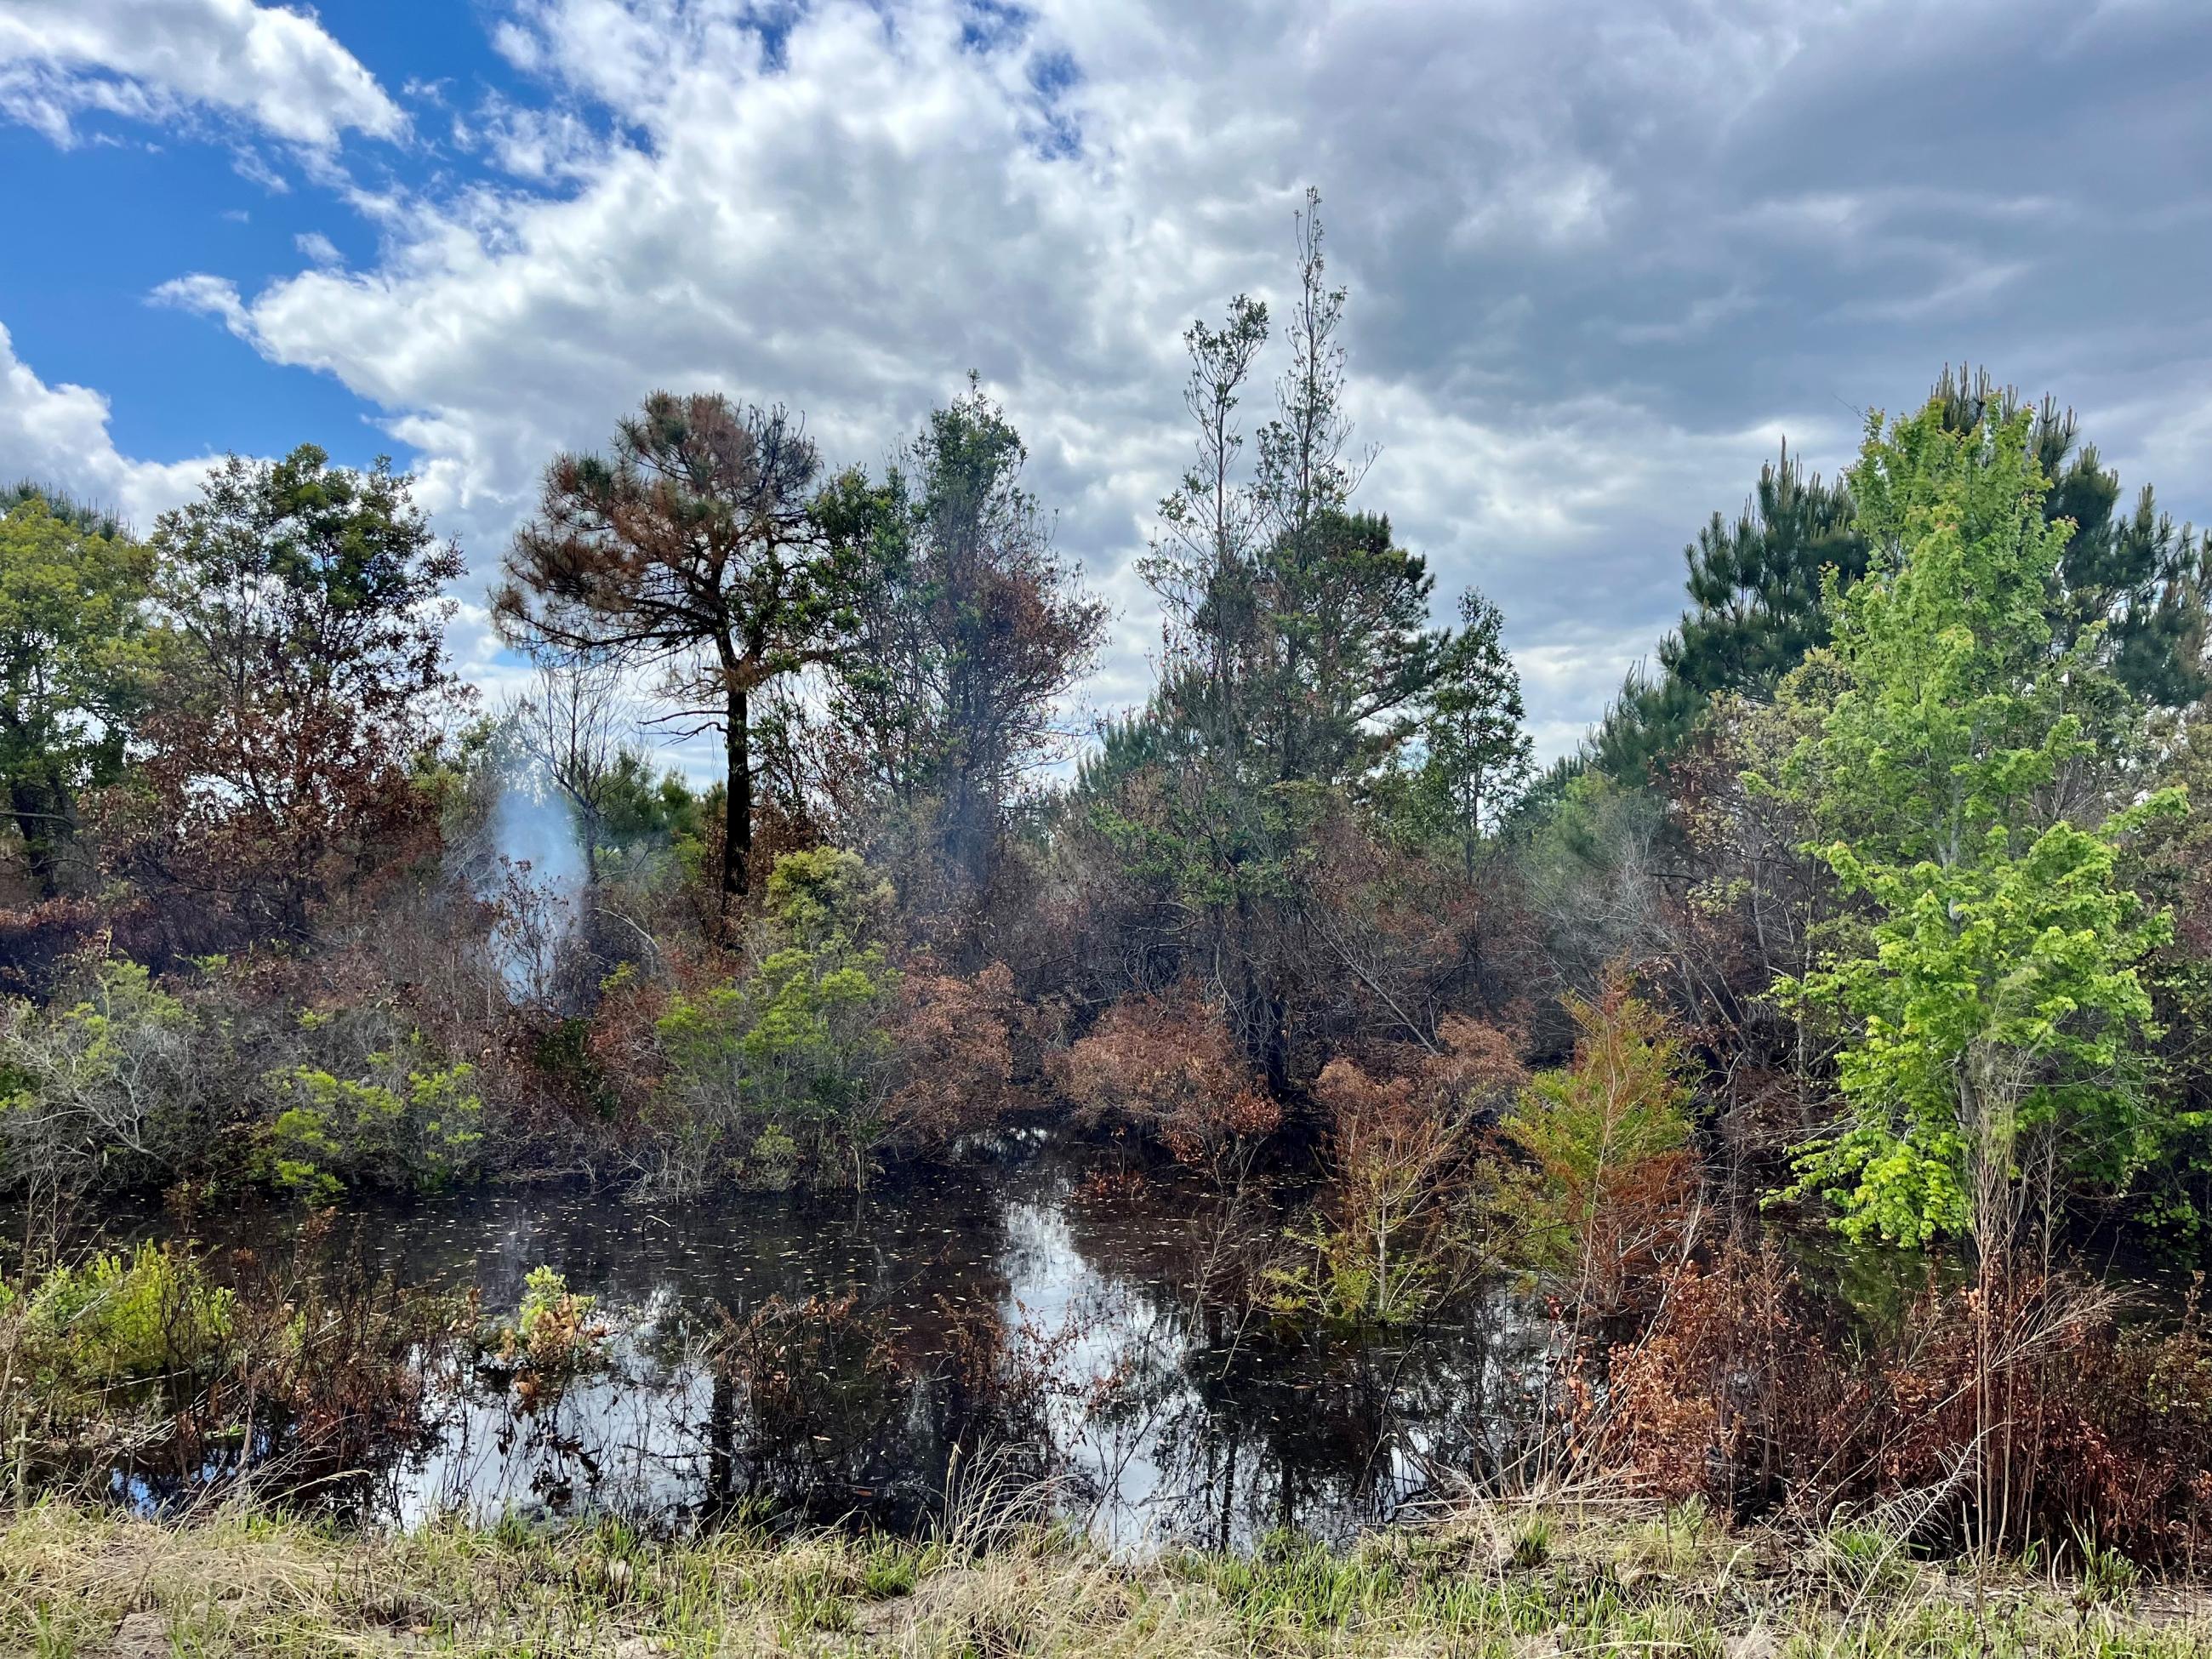 Flooding operations have raised the water table, but some smoldering areas still linger. Smoke is visible in this photo, just feet away from the water's edge. 